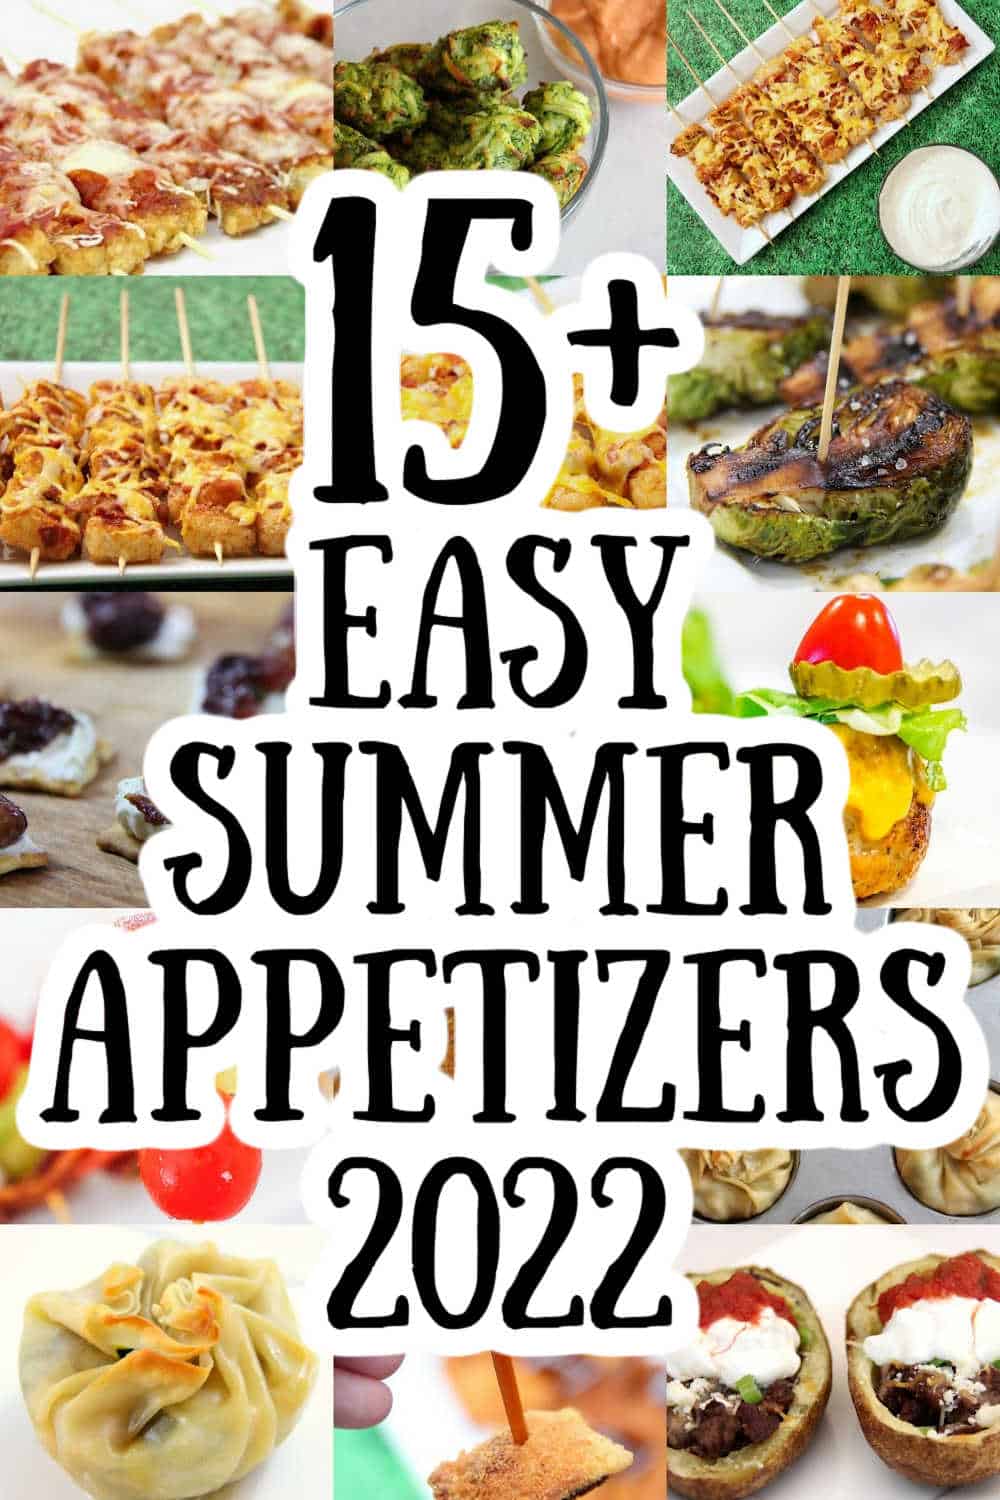 Easy Summer Appetizers of 2022 - Made with HAPPY